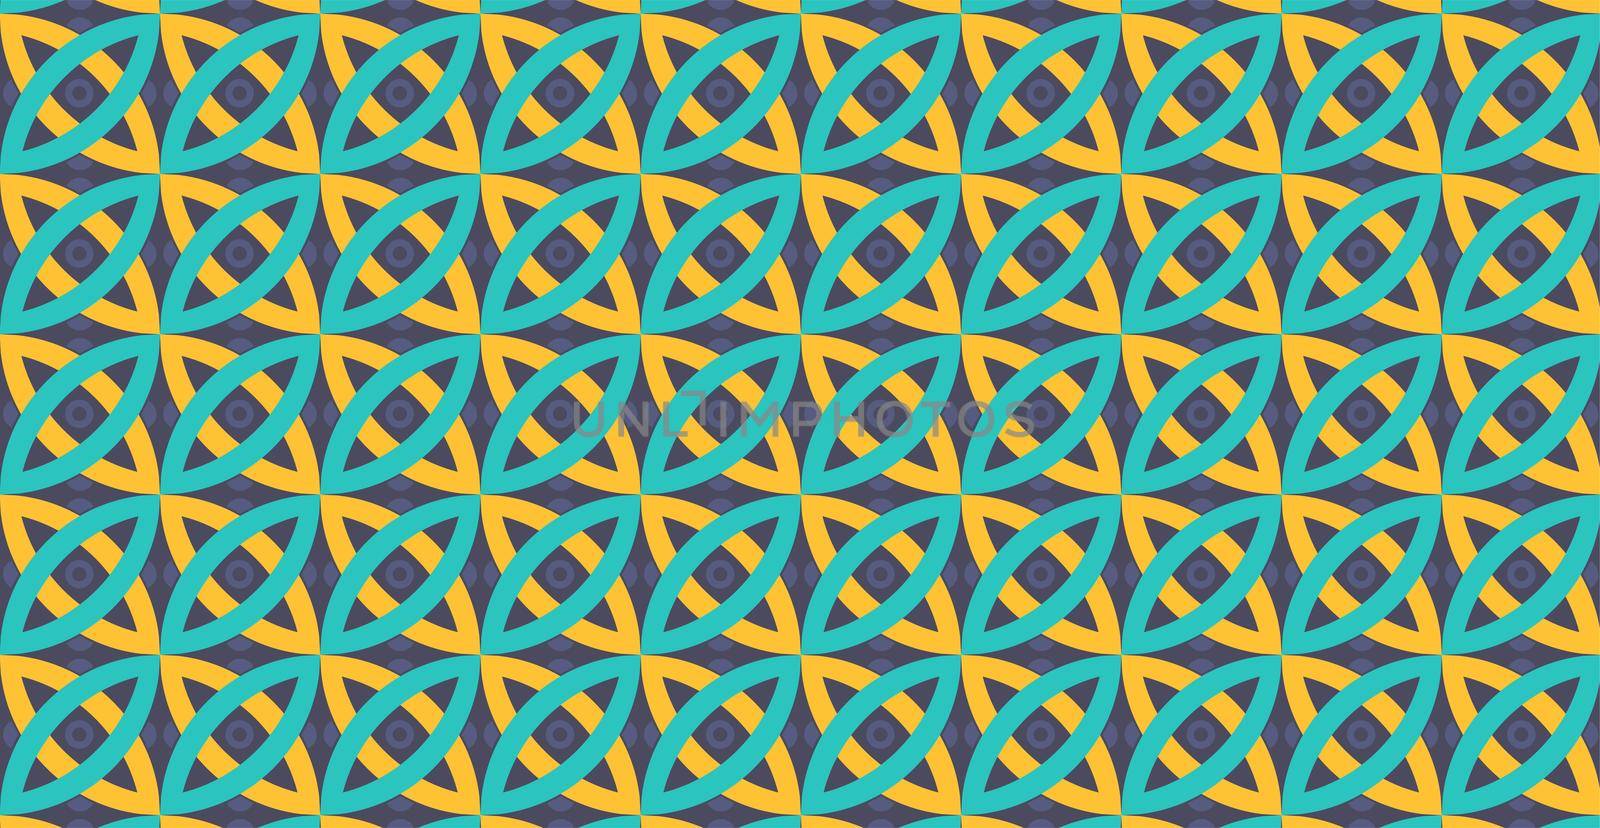 Abstract geometric background. Geometric patterns in different colors. Geometric art print. Can be used for wallpaper, background, fabric design, textile, wrapping paper, digital paper, etc.